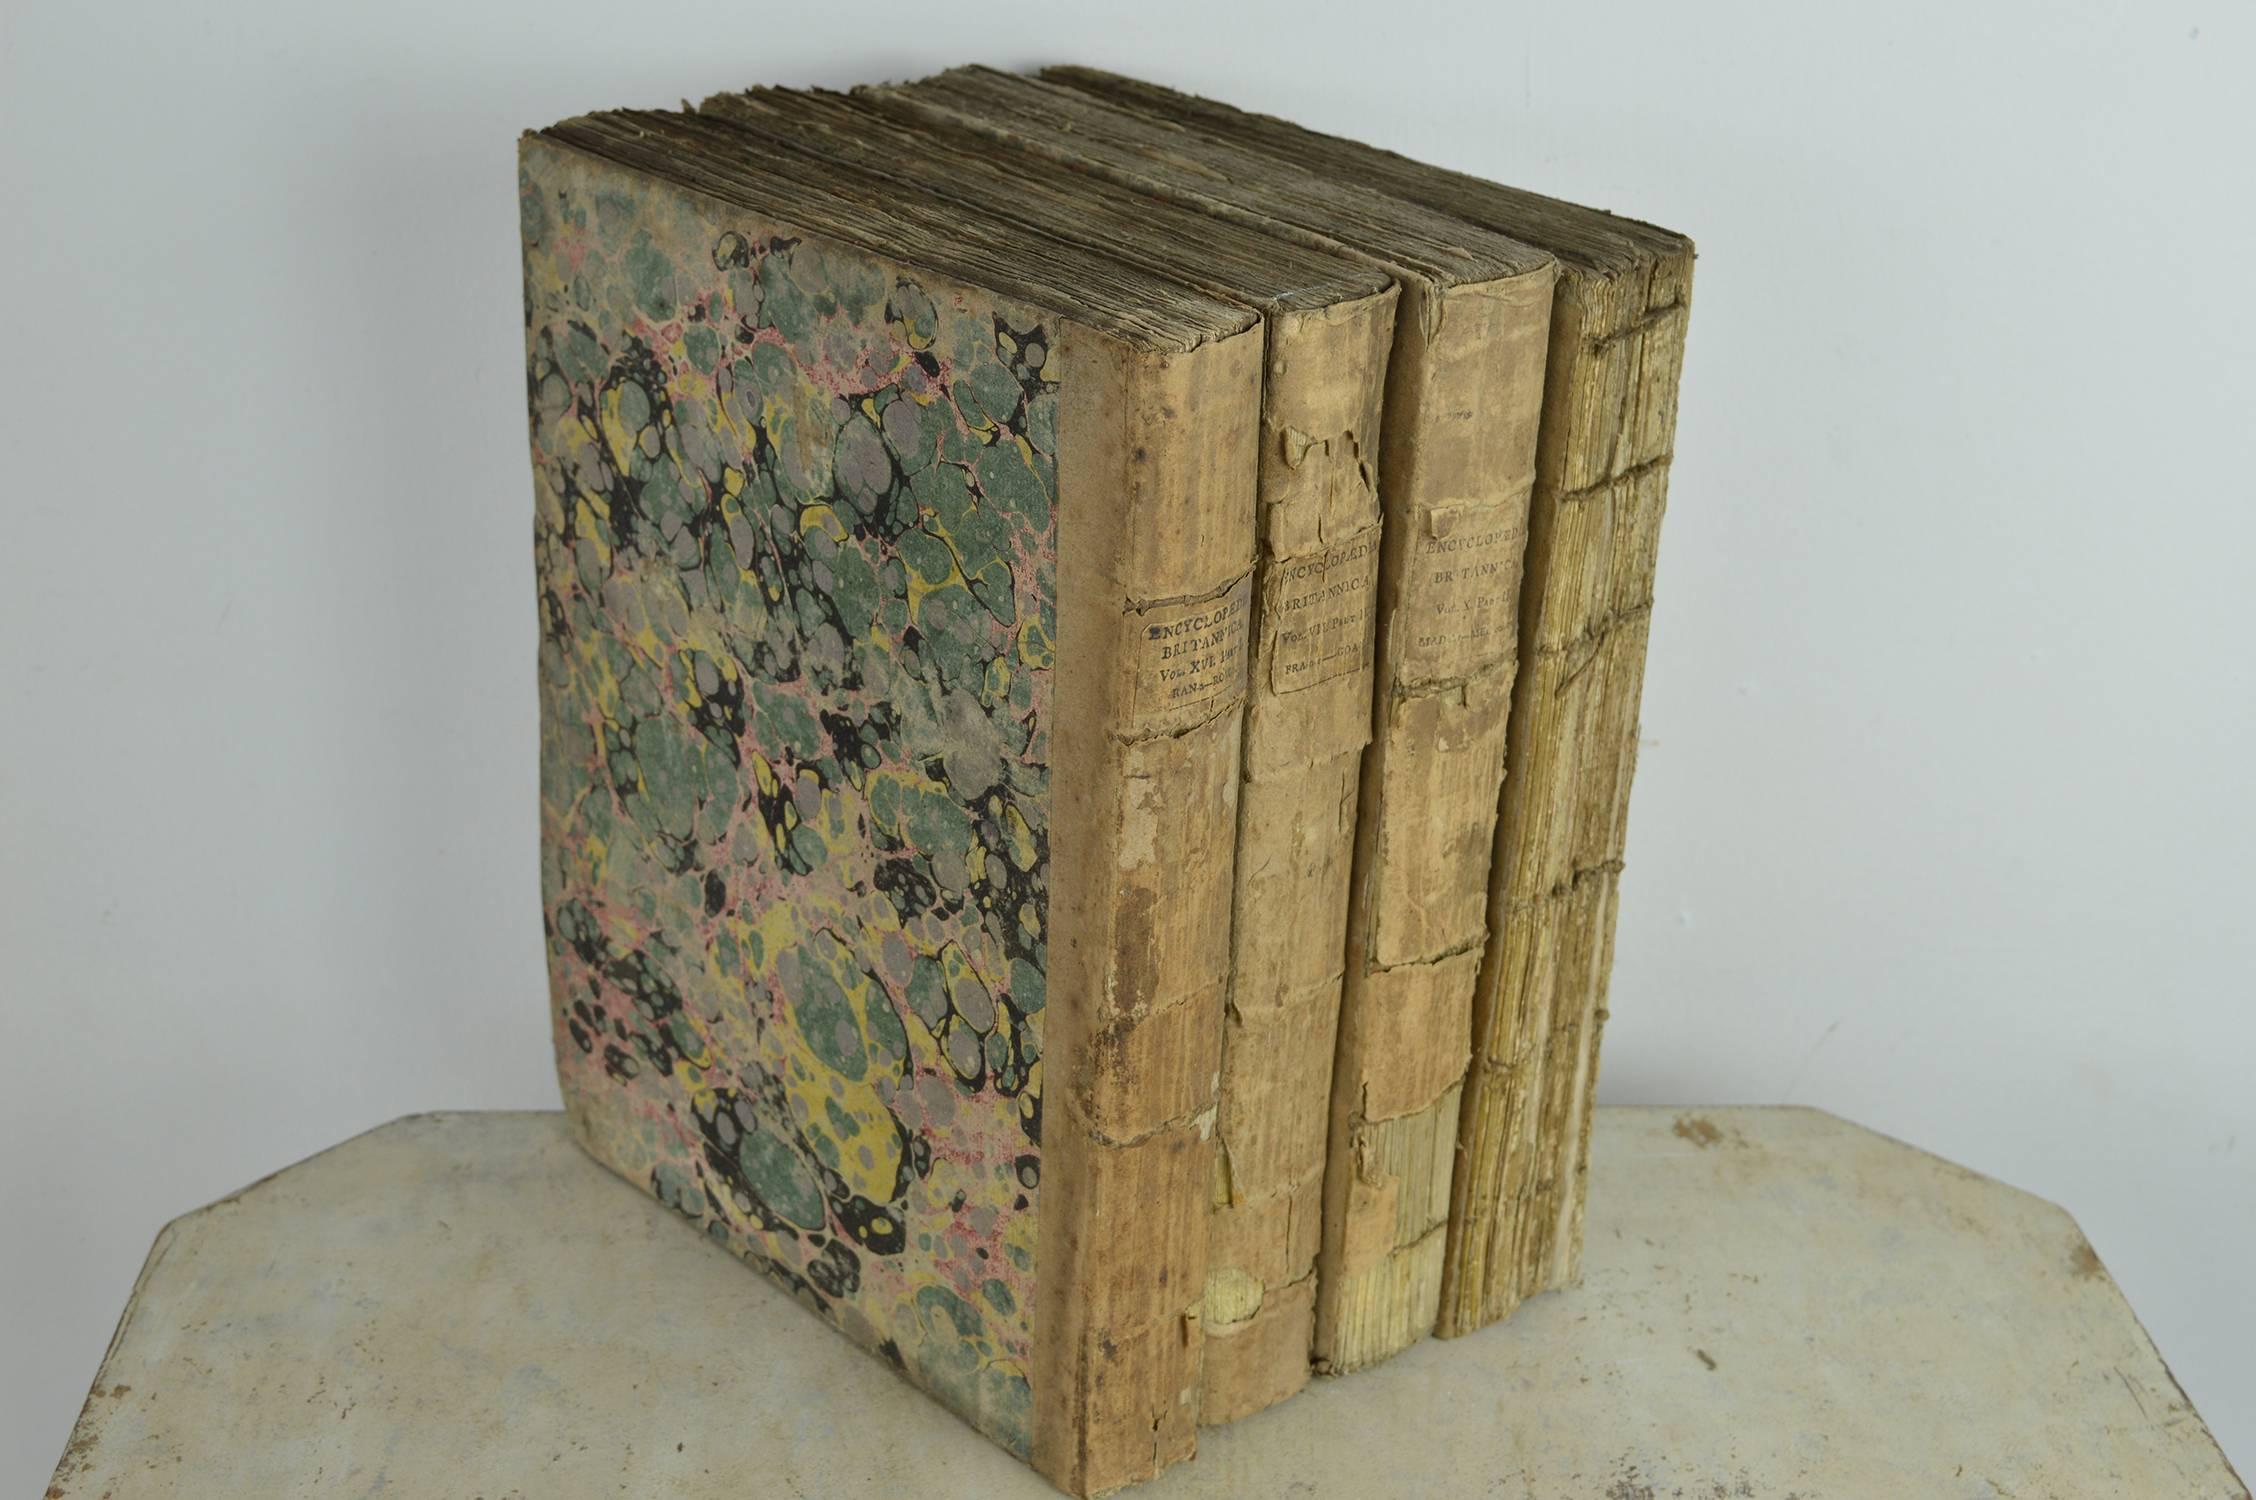 Other Sets of Antique 18th Century Books with Marbleized Bindings